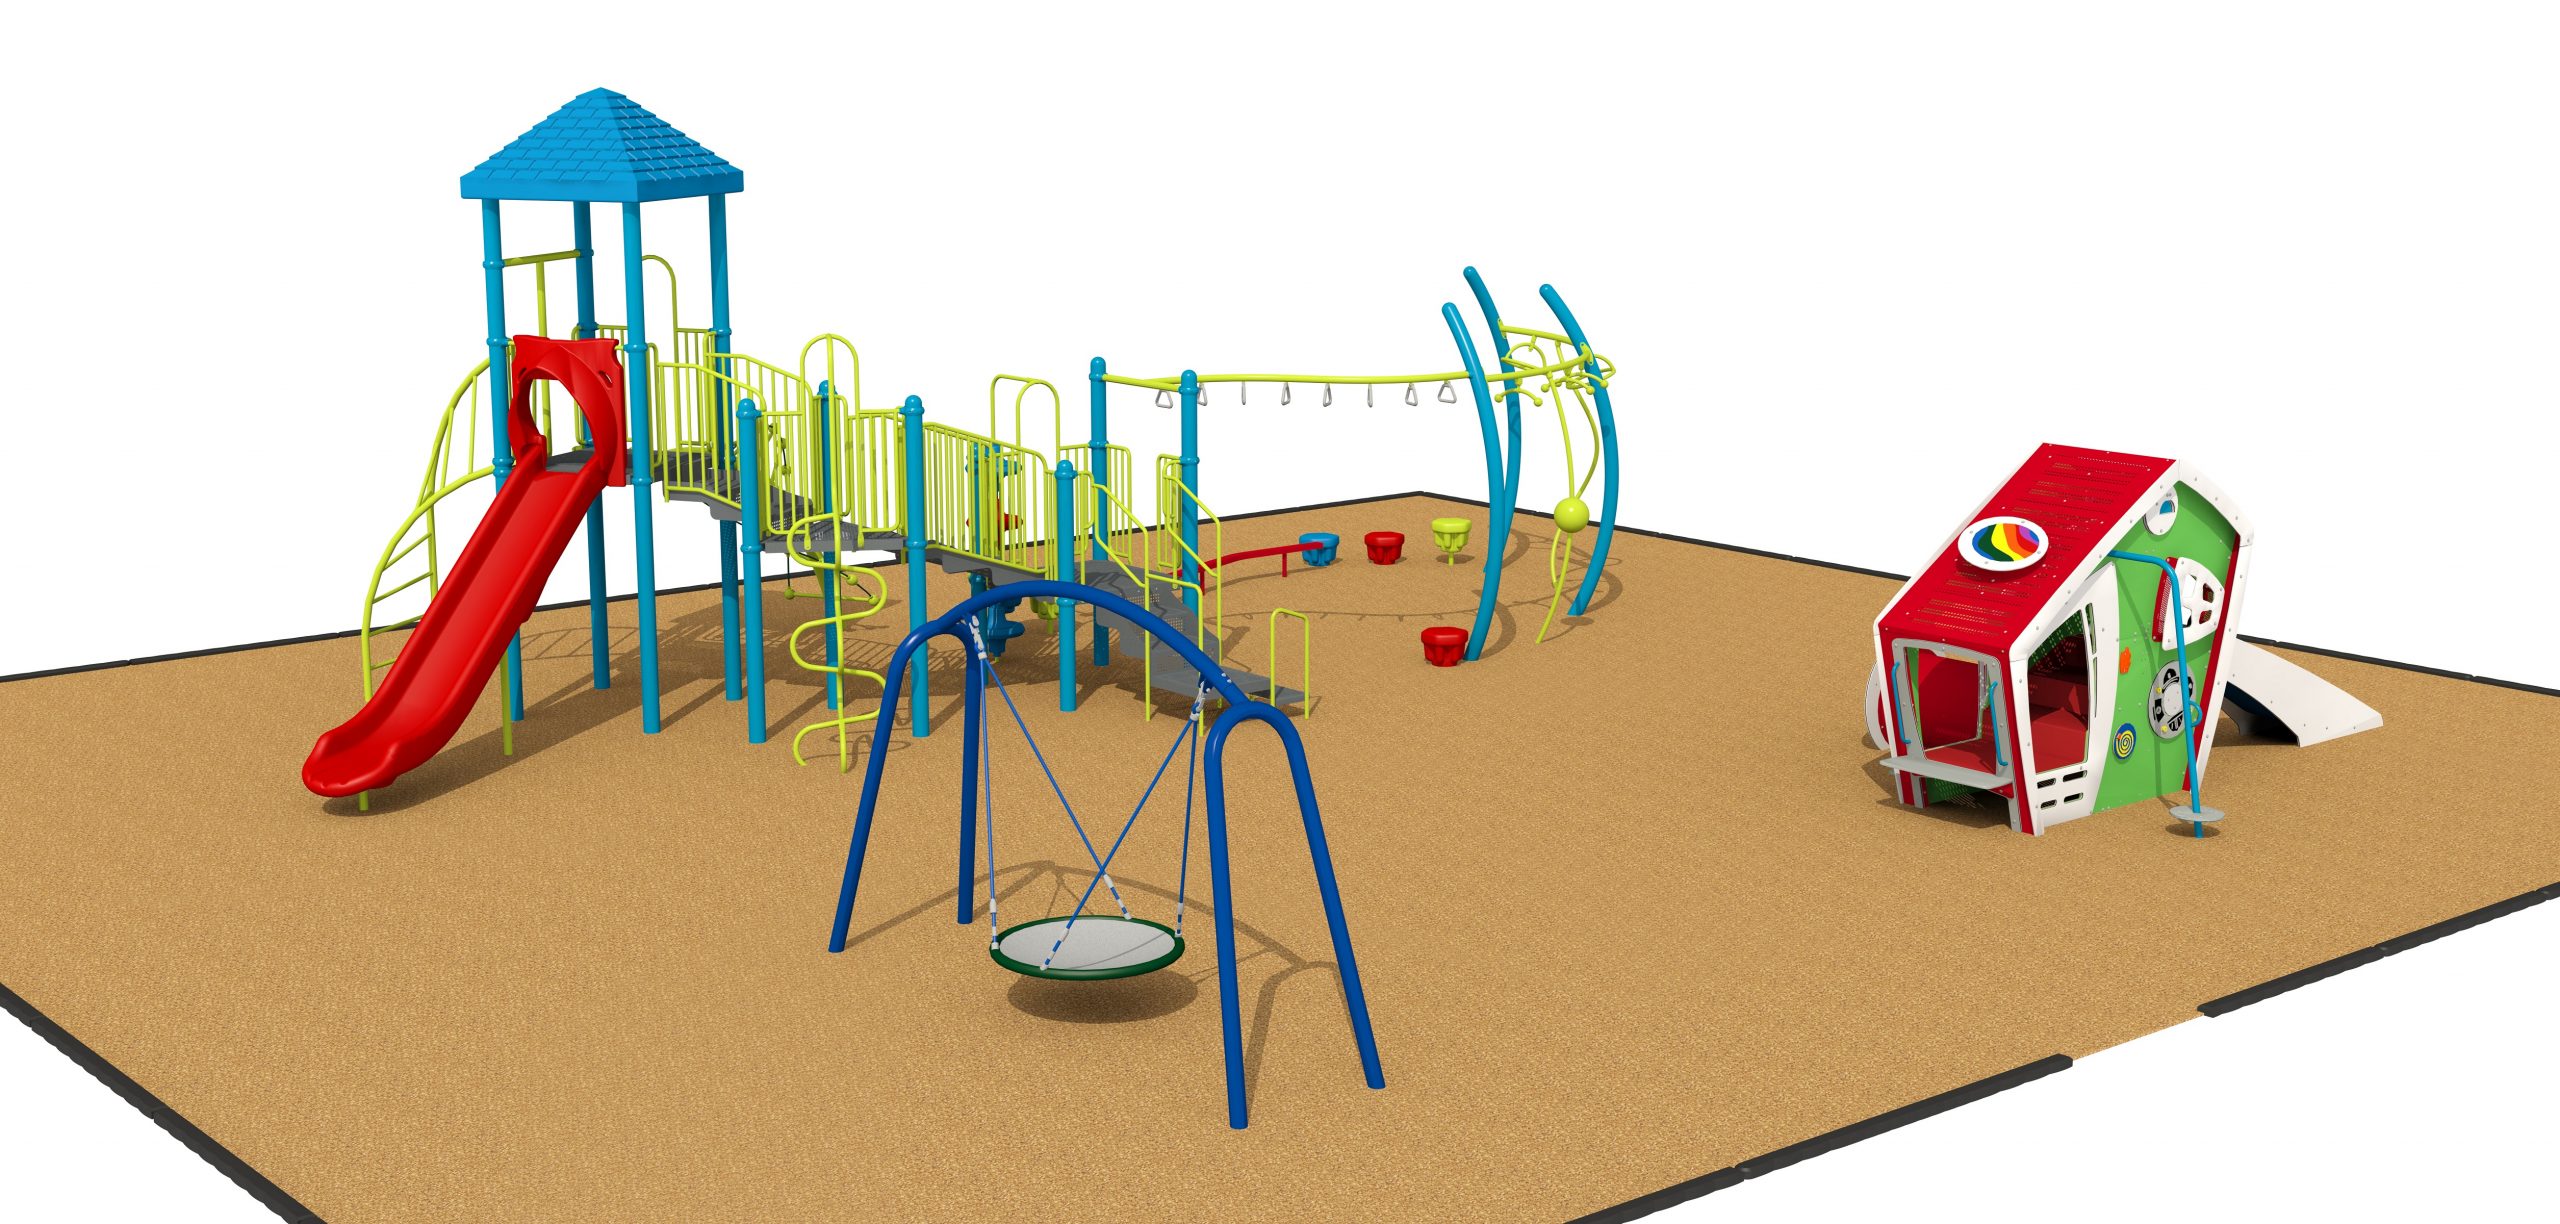 design layout of playground with inclusive play elements, fitness ailments, and standard playground structure